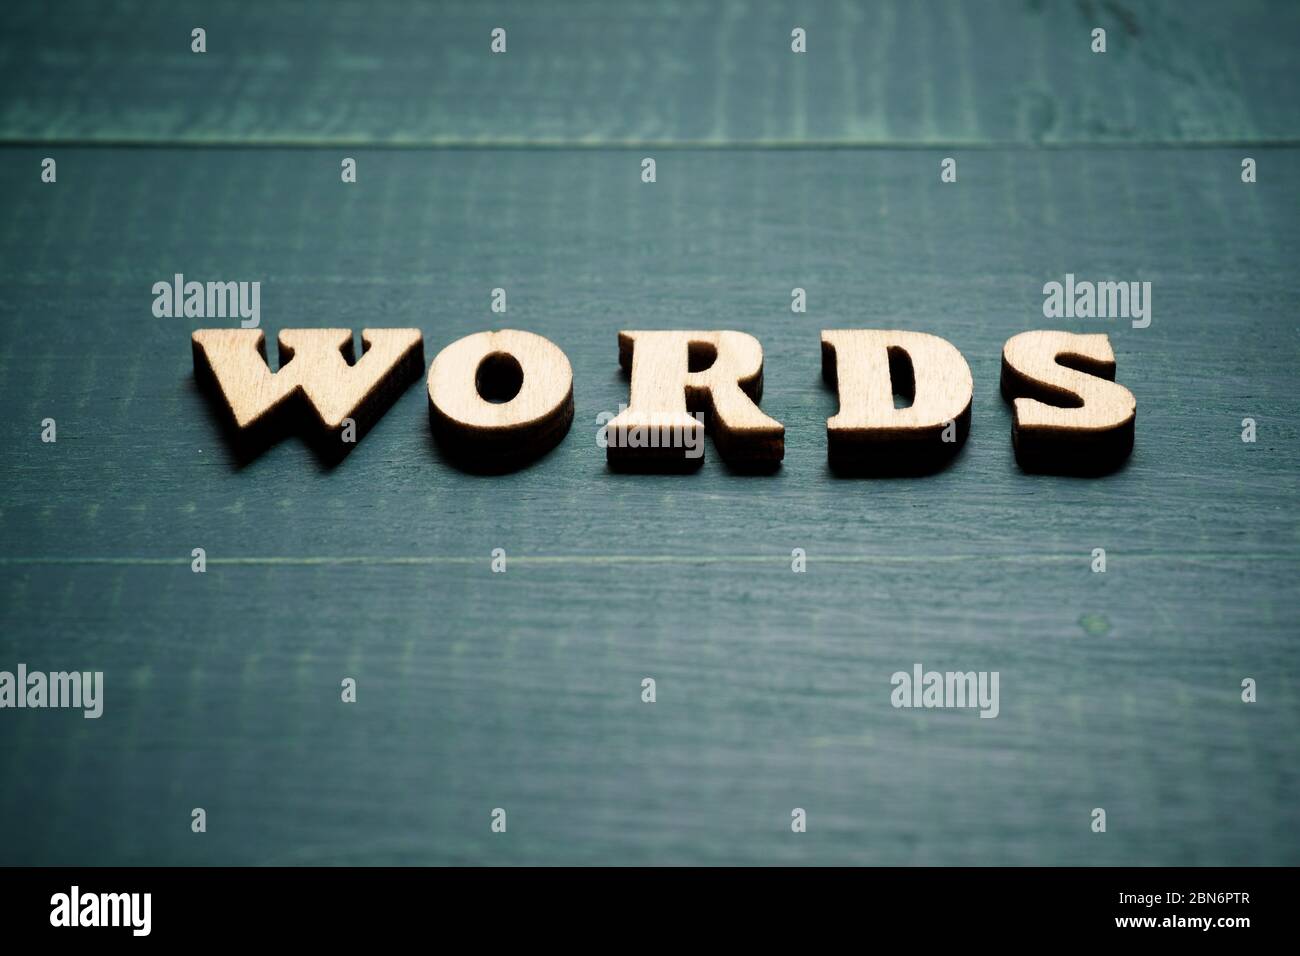 Words text on a wood table. Stock Photo